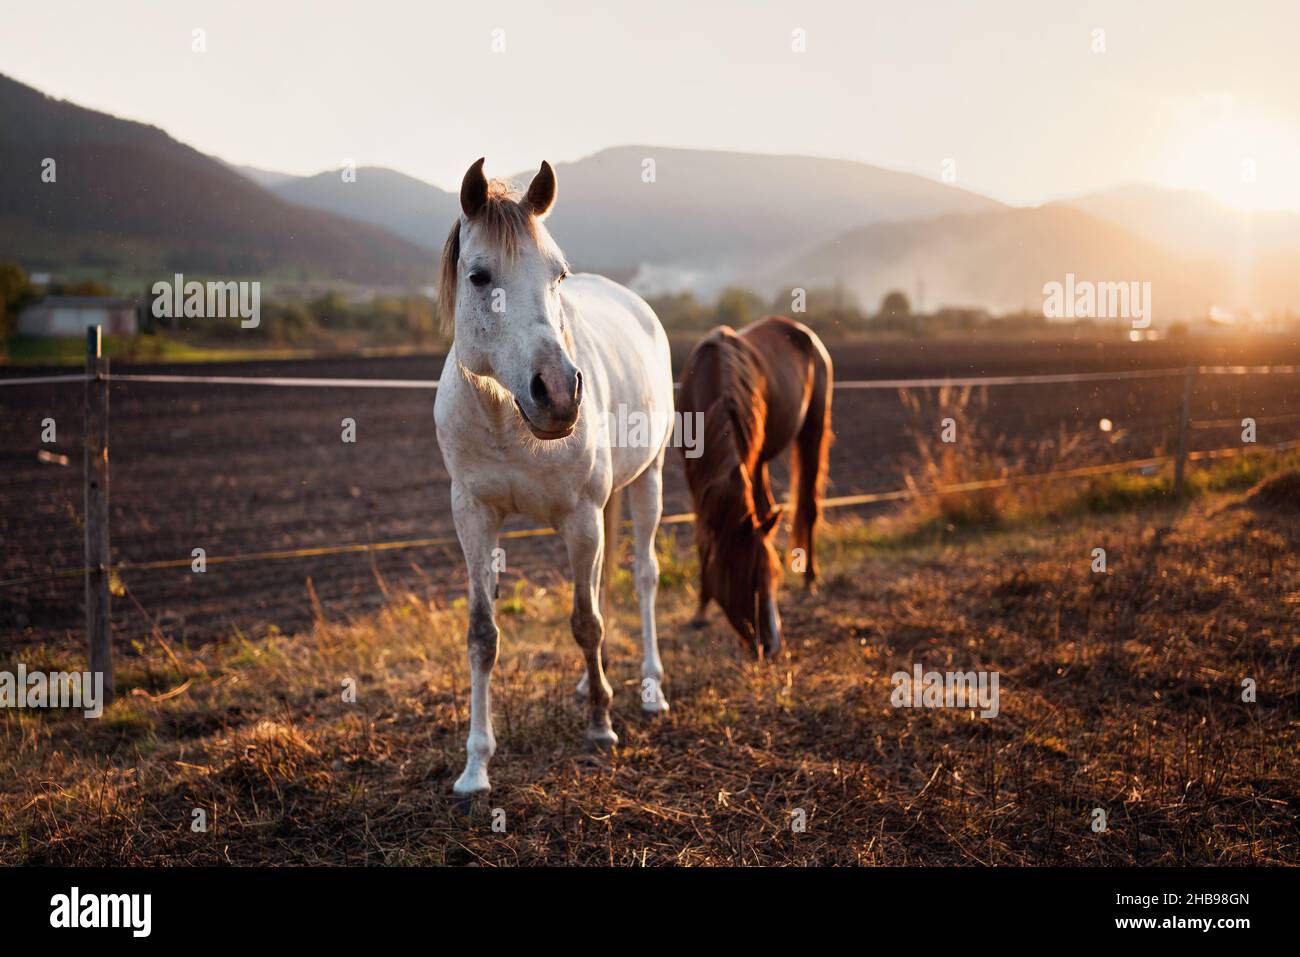 Two Arabian horses - white and brown one - walking on grass ground lit by afternoon sun, blurred field and mountains background Stock Photo